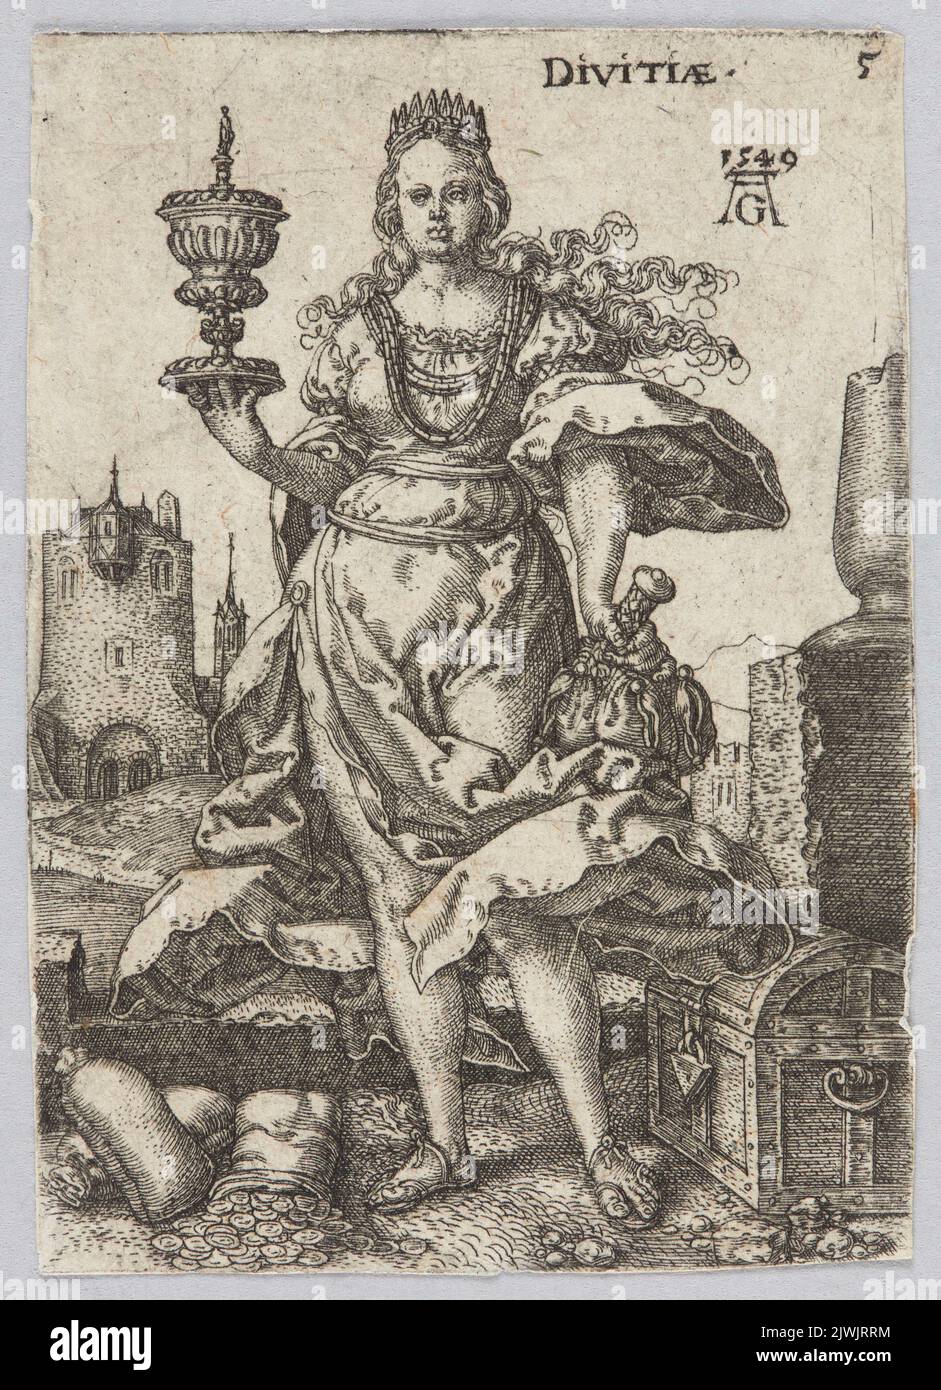 Divitiae, from the cycle: Allegorical figures. Aldegrever, Heinrich (1502-1555/1561), graphic artist Stock Photo